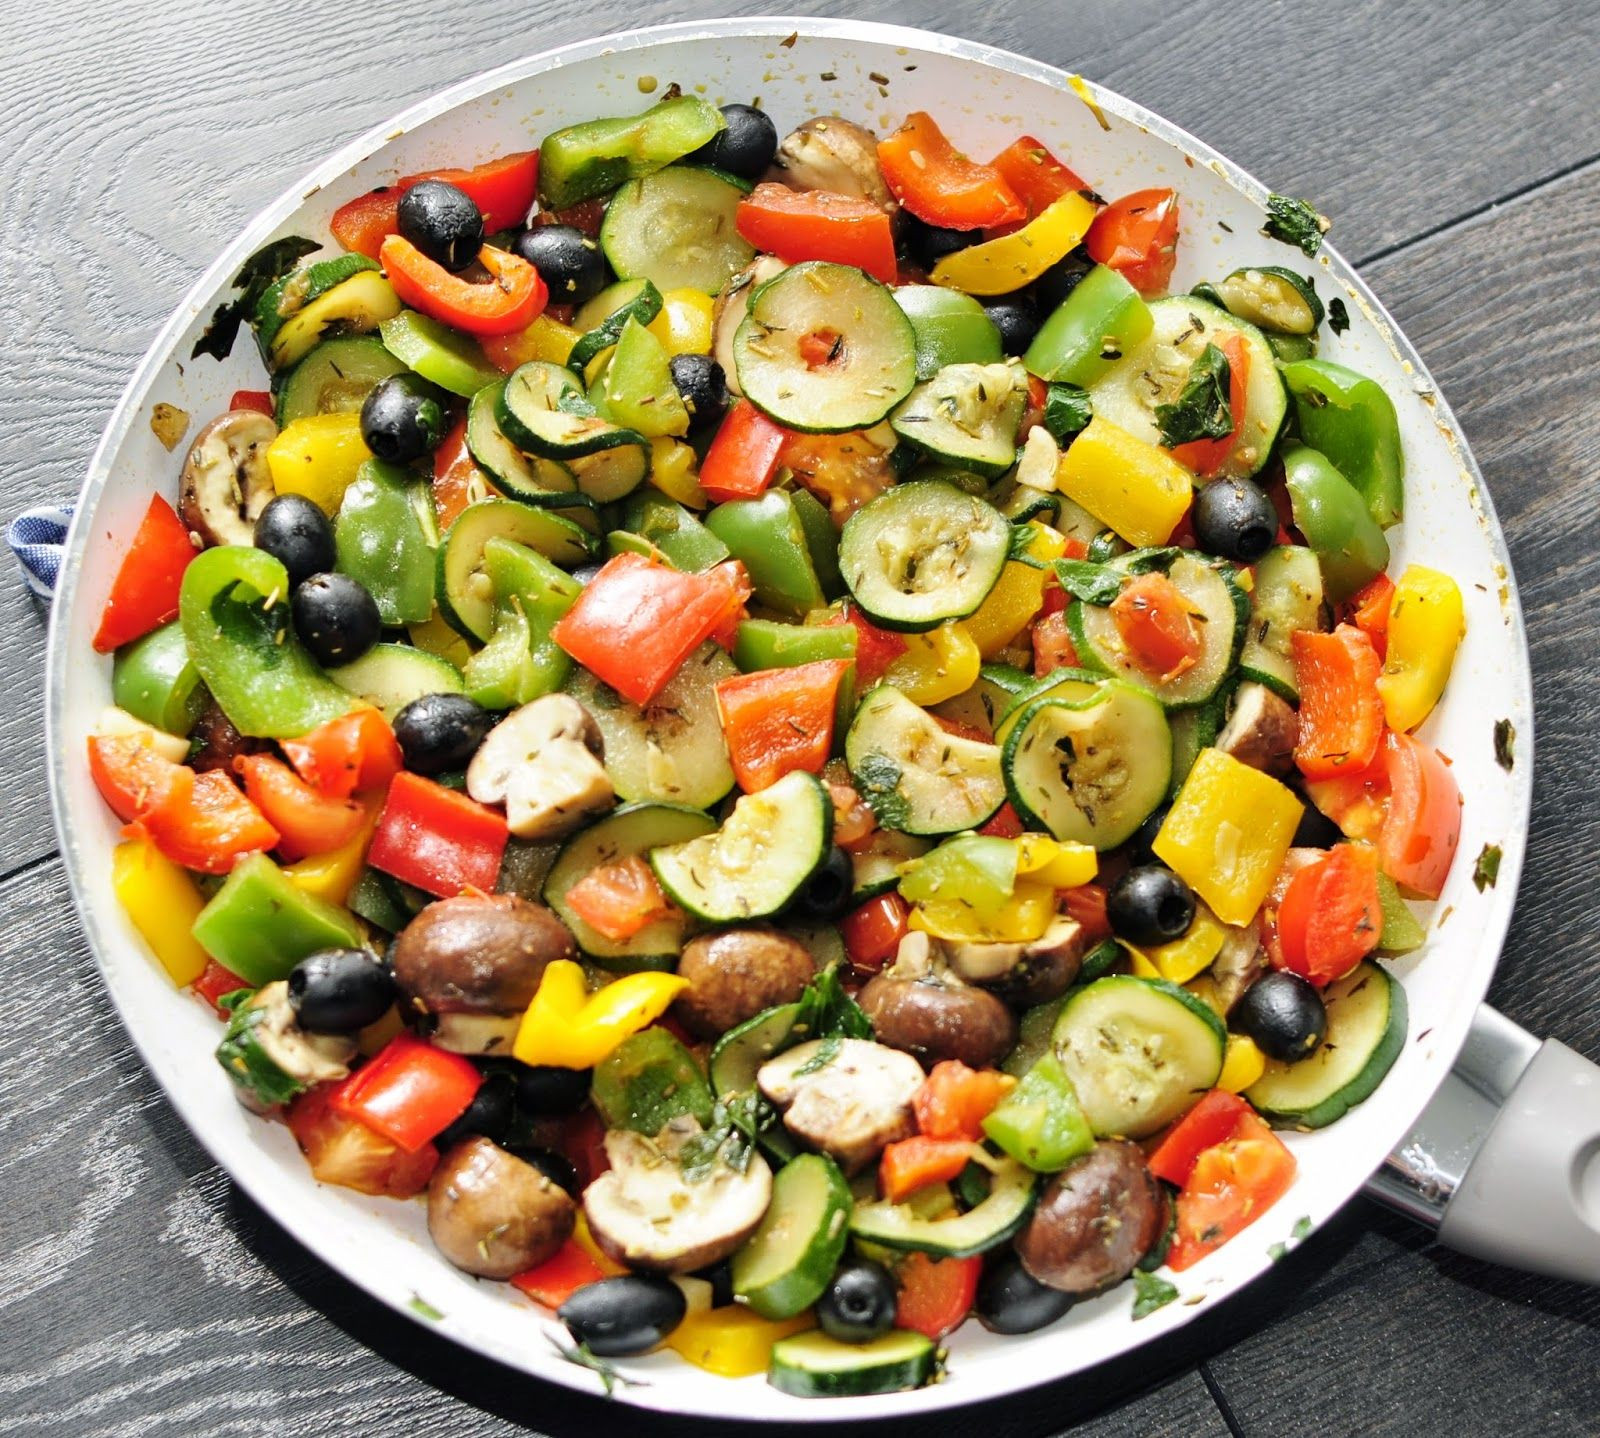 Vegetable Side Dishes Healthy
 Check out Rainbow Ve able Side It s so easy to make